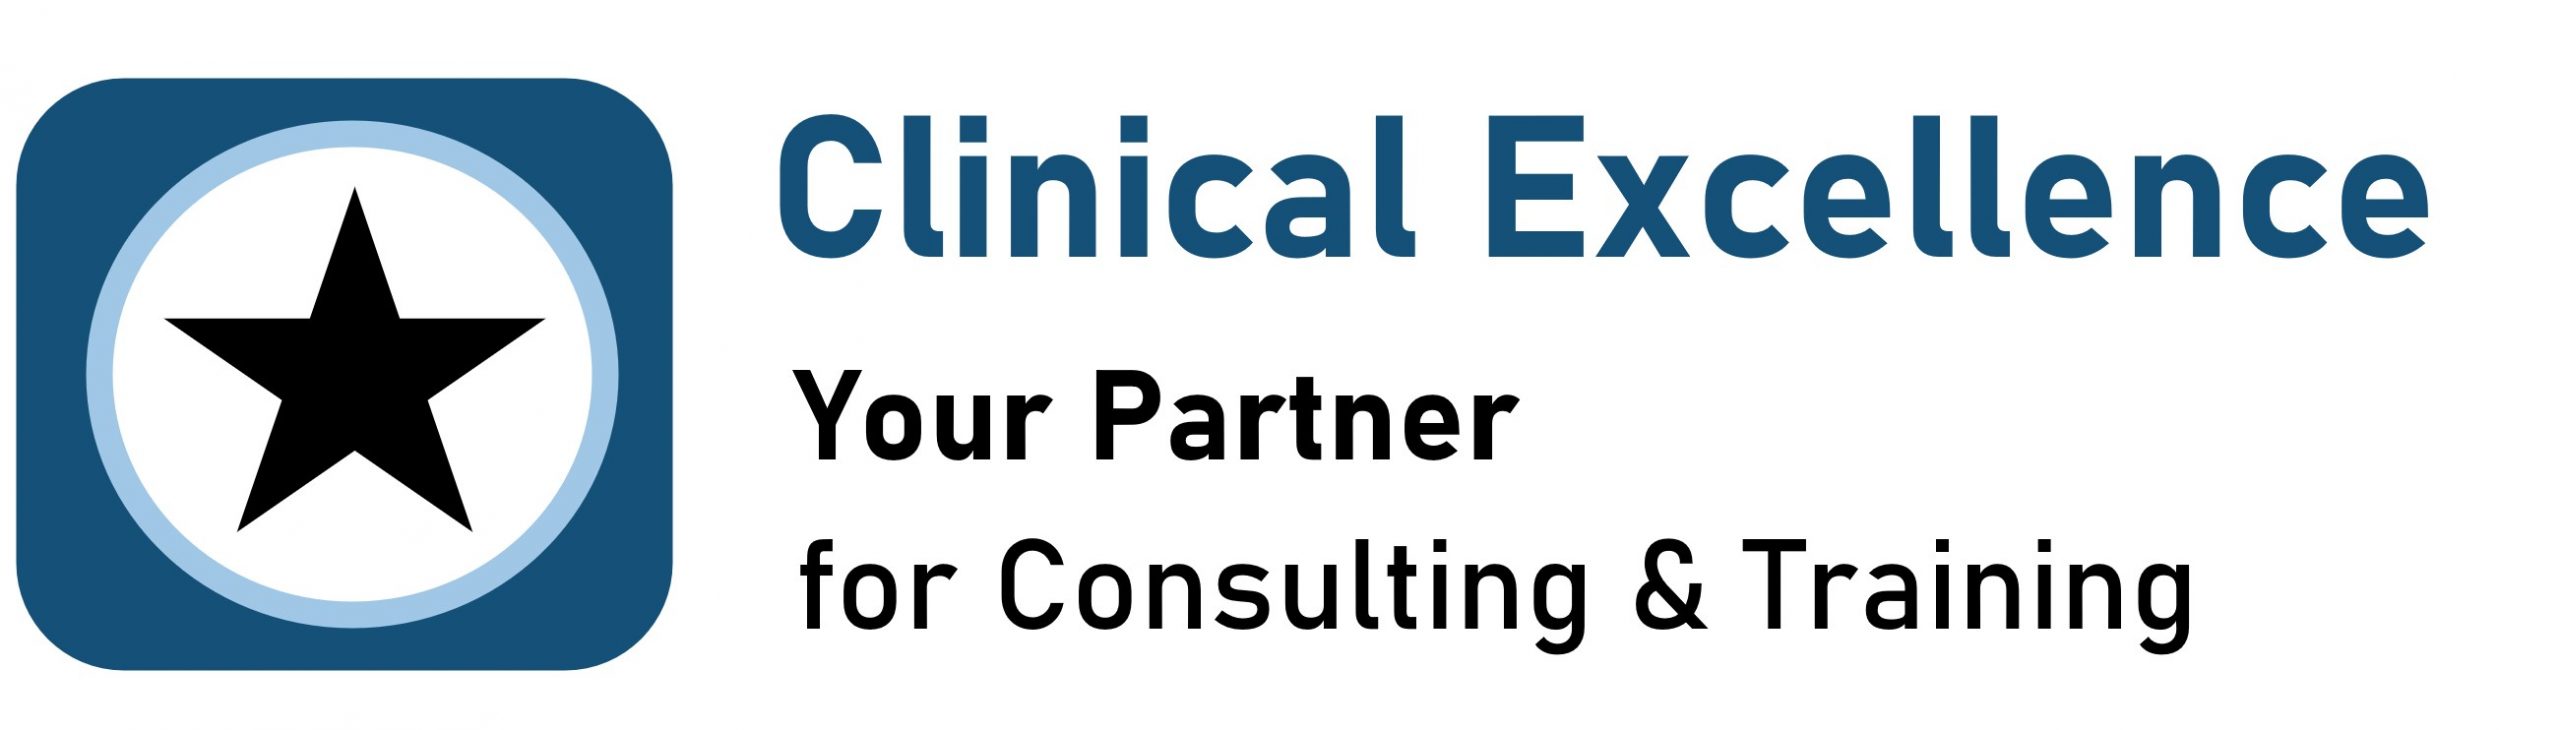 Clinical Excellence - Your Partner for Consulting & Training